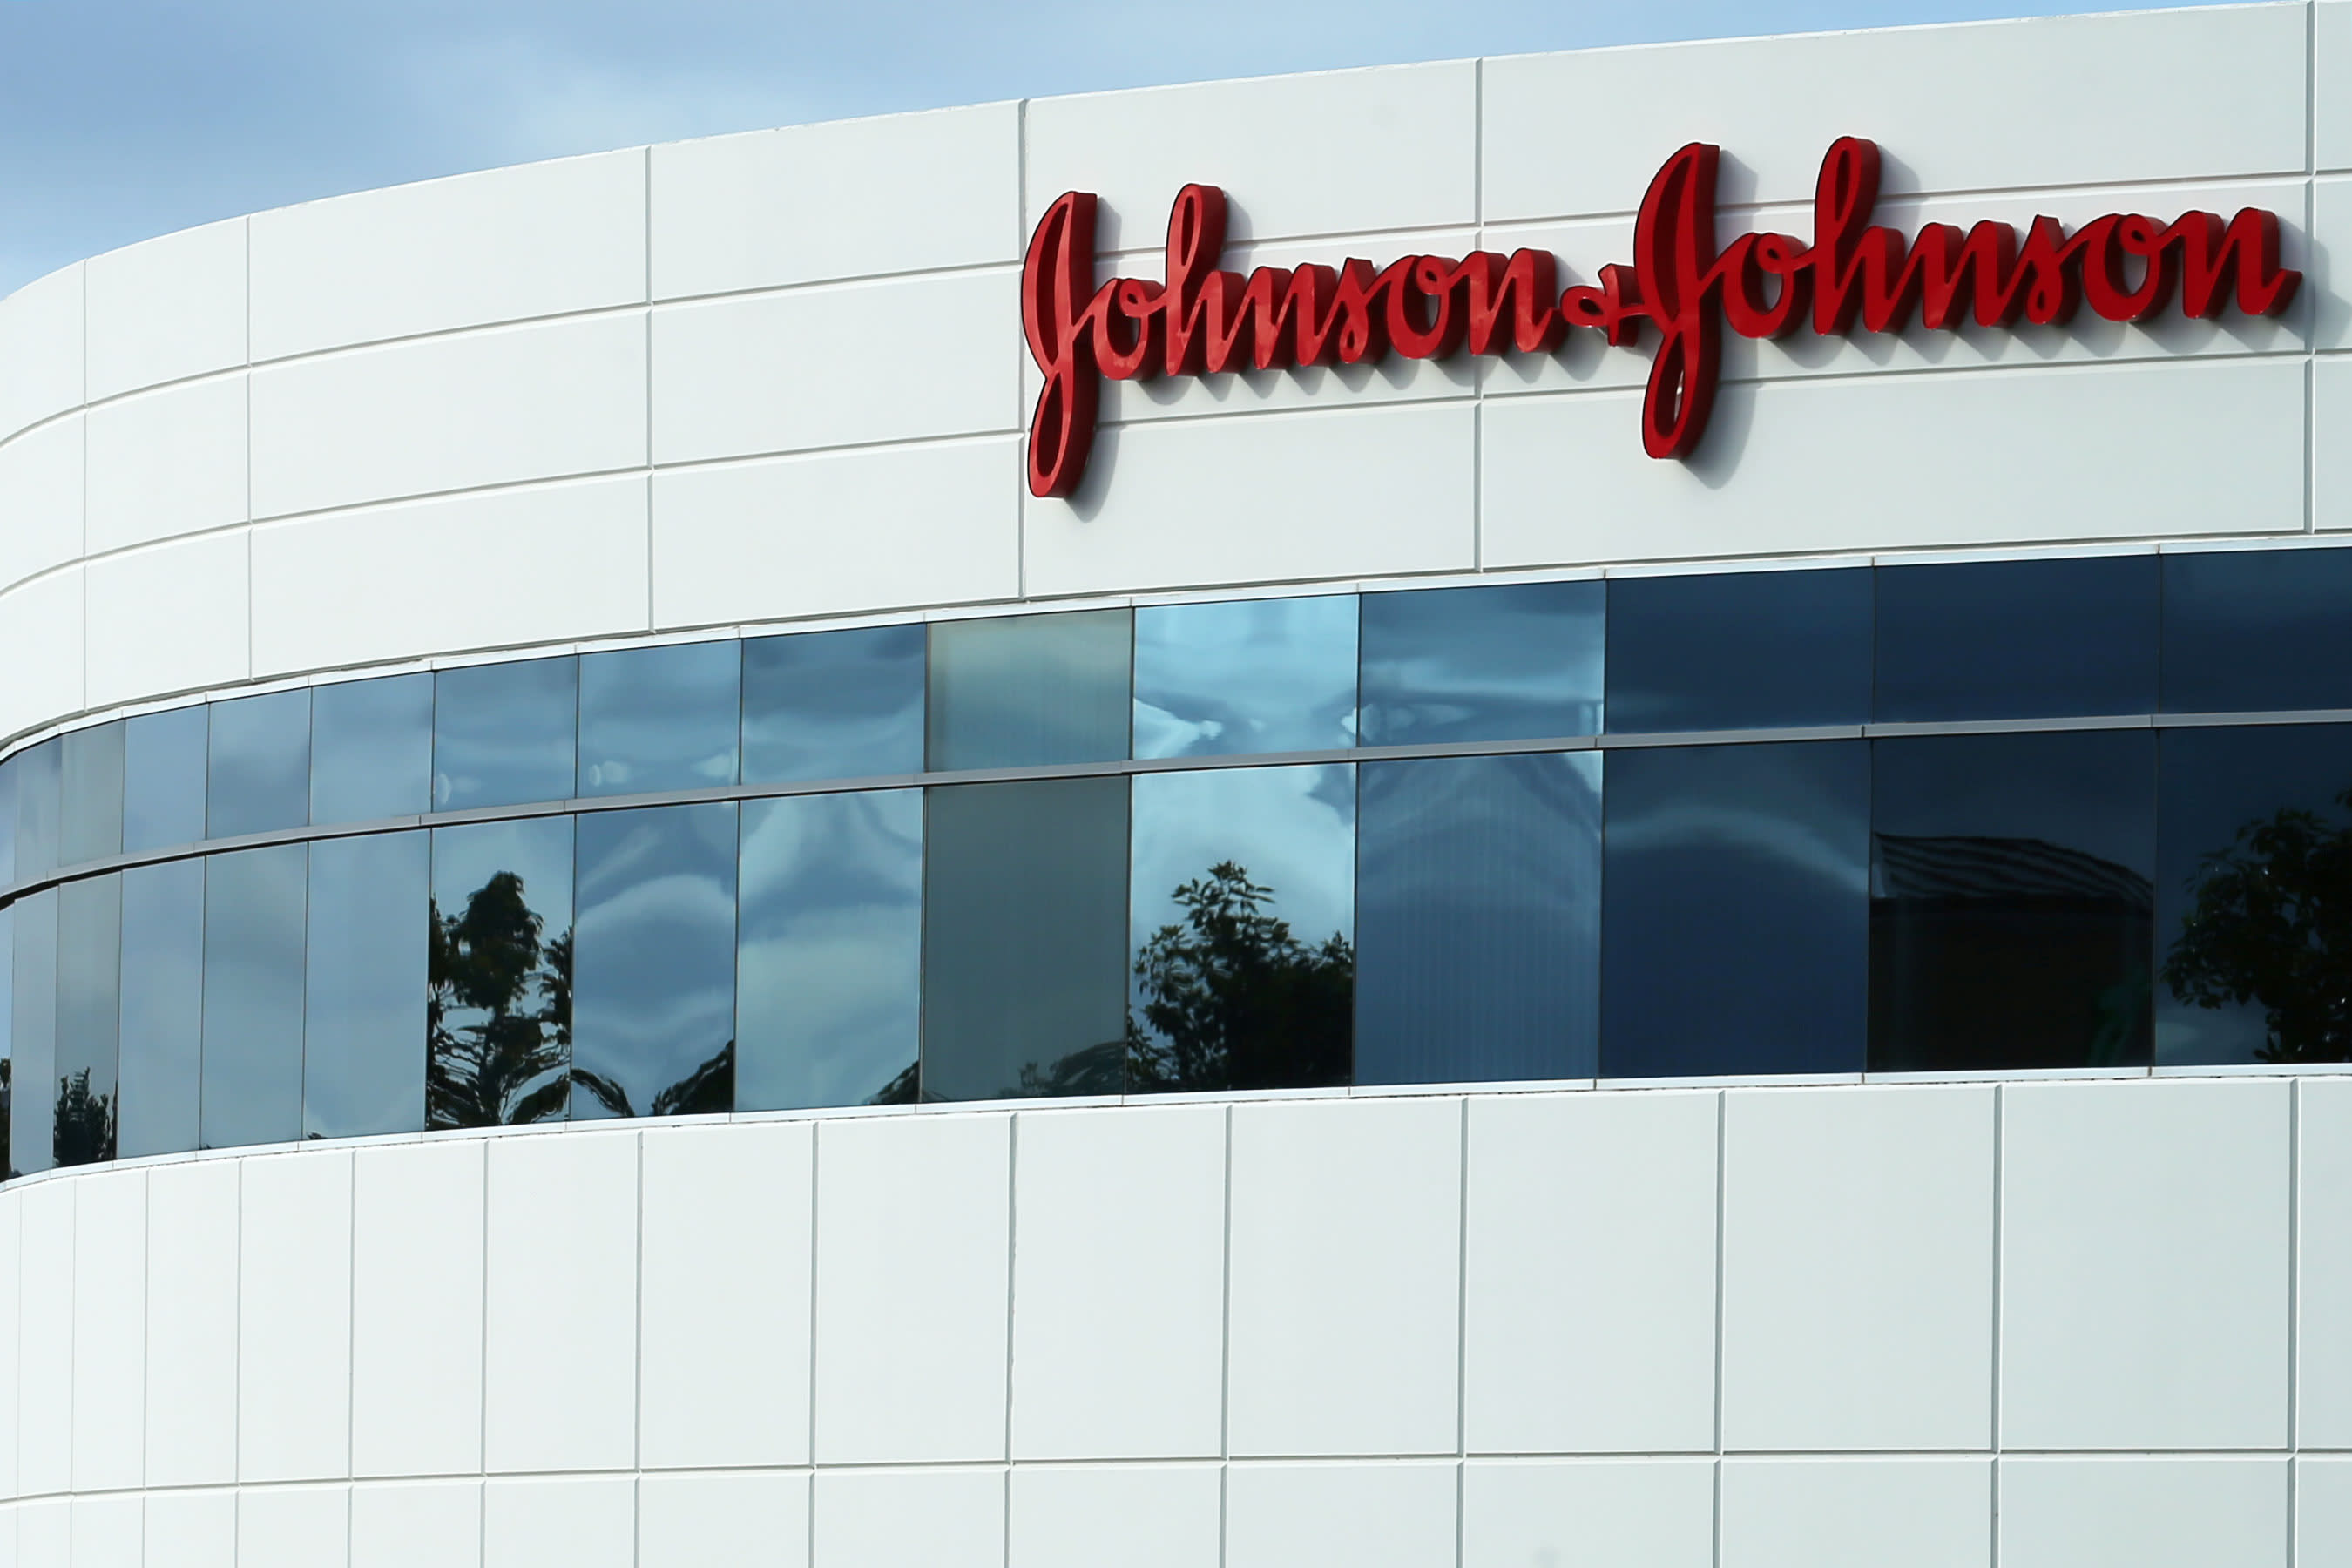 J&J options to break up into two businesses, separating customer goods and pharmaceutical organizations